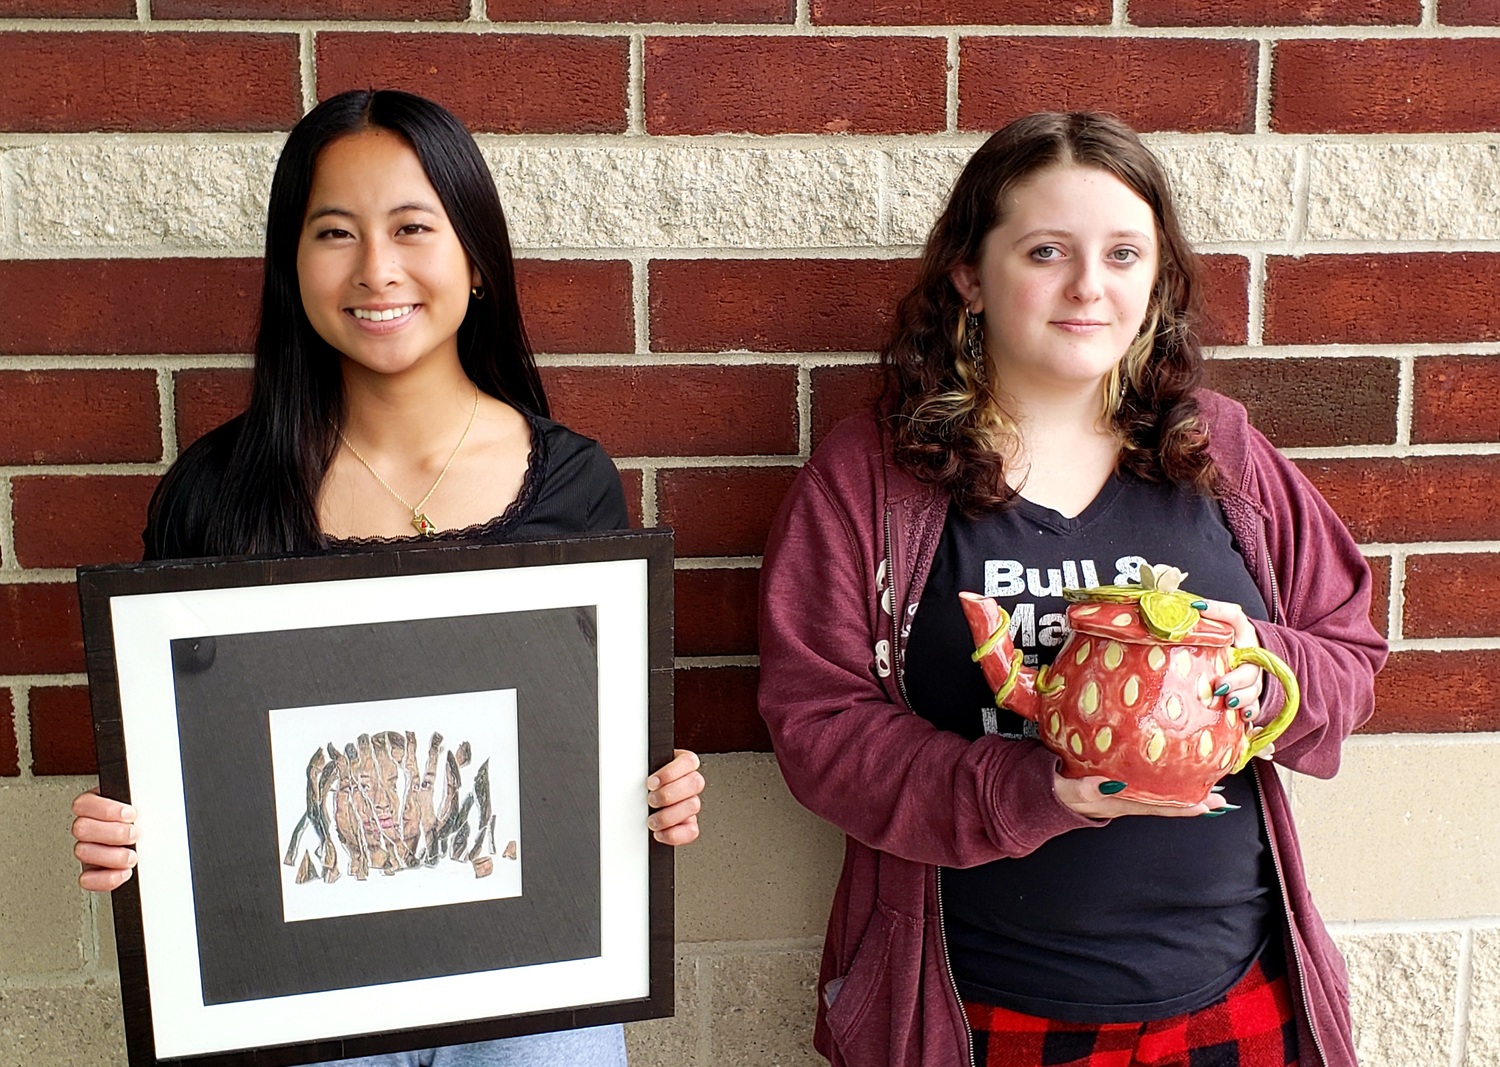 Eastport-South Manor Jr.-Sr. High School seniors Sydney Flores and Gianna D’Alessandro were selected to exhibit at BAFFA’s annual high school juried invitational art exhibit. COURTESY EASTPORT-SOUTH MANOR SCHOOL DISTRICT